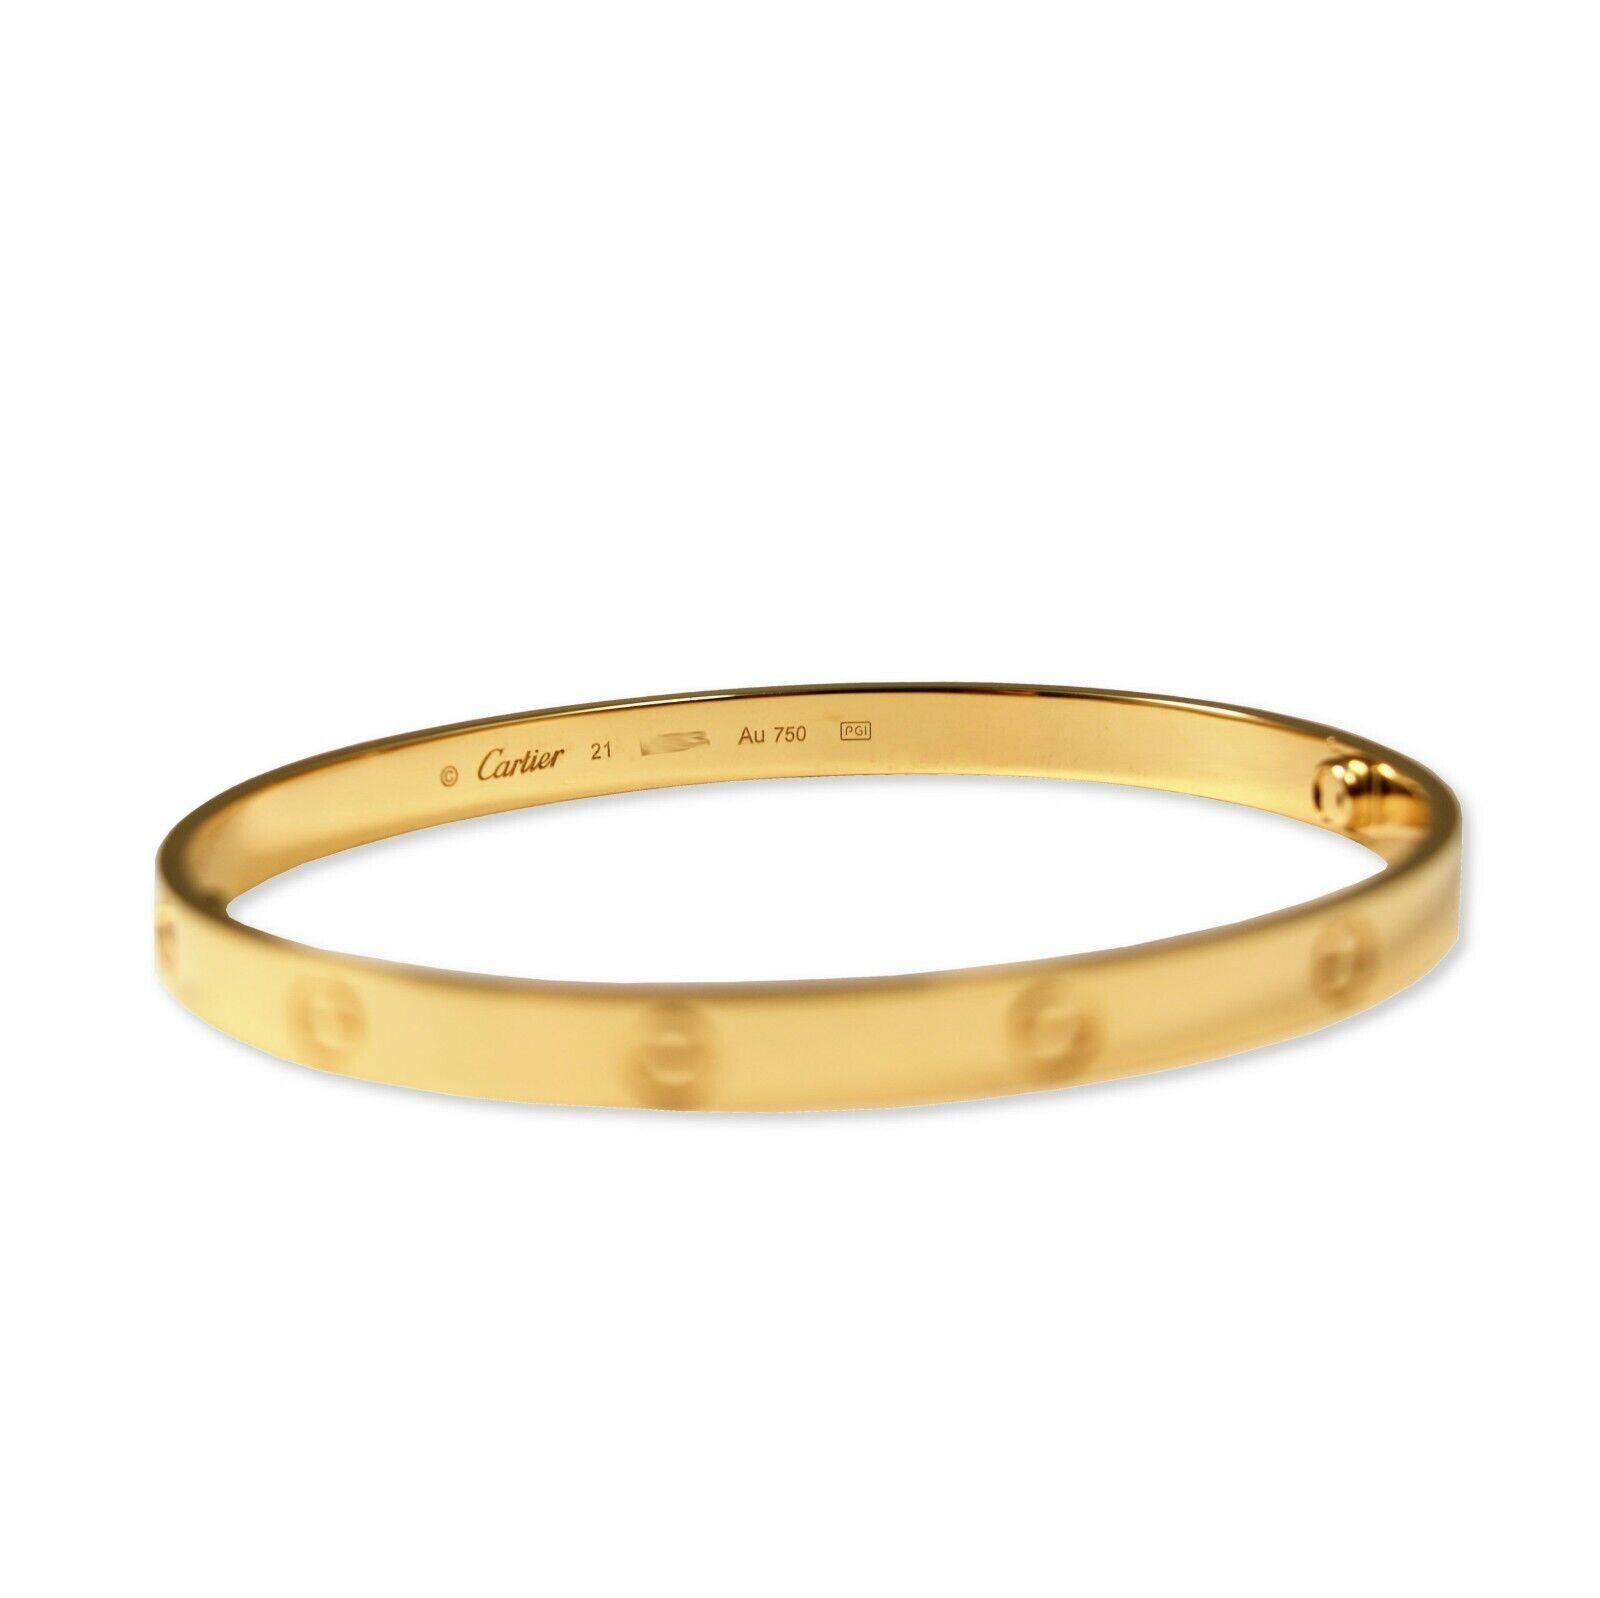 Designer: Cartier

Collection: Love

Style:  New Screw System

Metal: Yellow  Gold 

Metal Purity: 18k 

Screw System: New Screw System

Total ItemWeight (Grams): approx. 38.8g

Bracelet Size : 21 = 21 cm ​​​​​​​

Hallmarks: Cartier; Serial #;